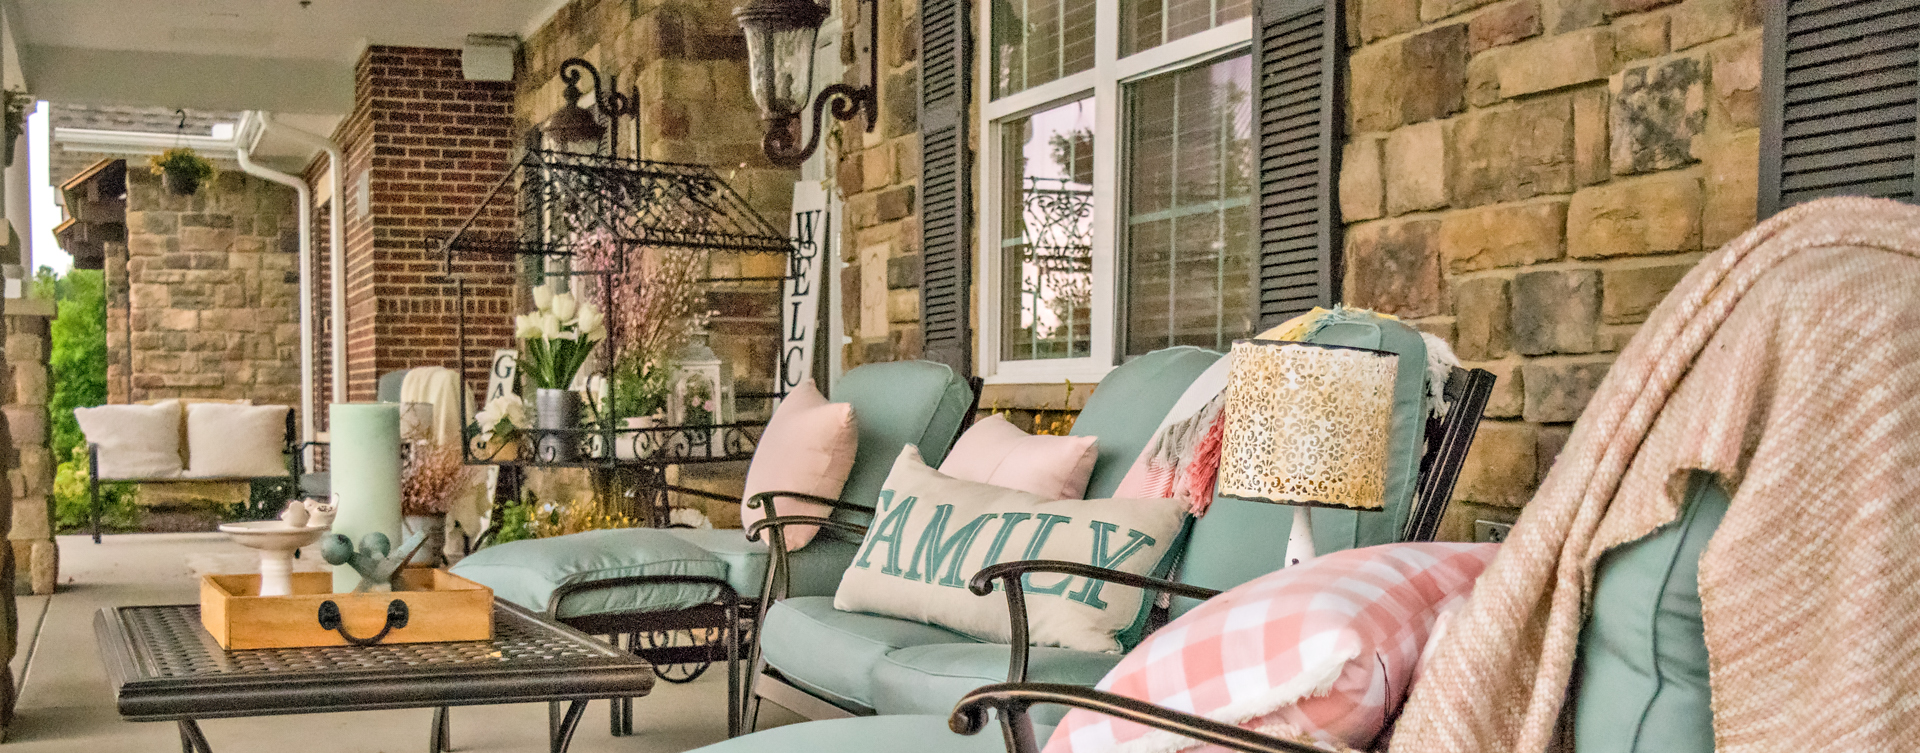 Relax in your favorite chair on the porch at Bickford of Spotsylvania